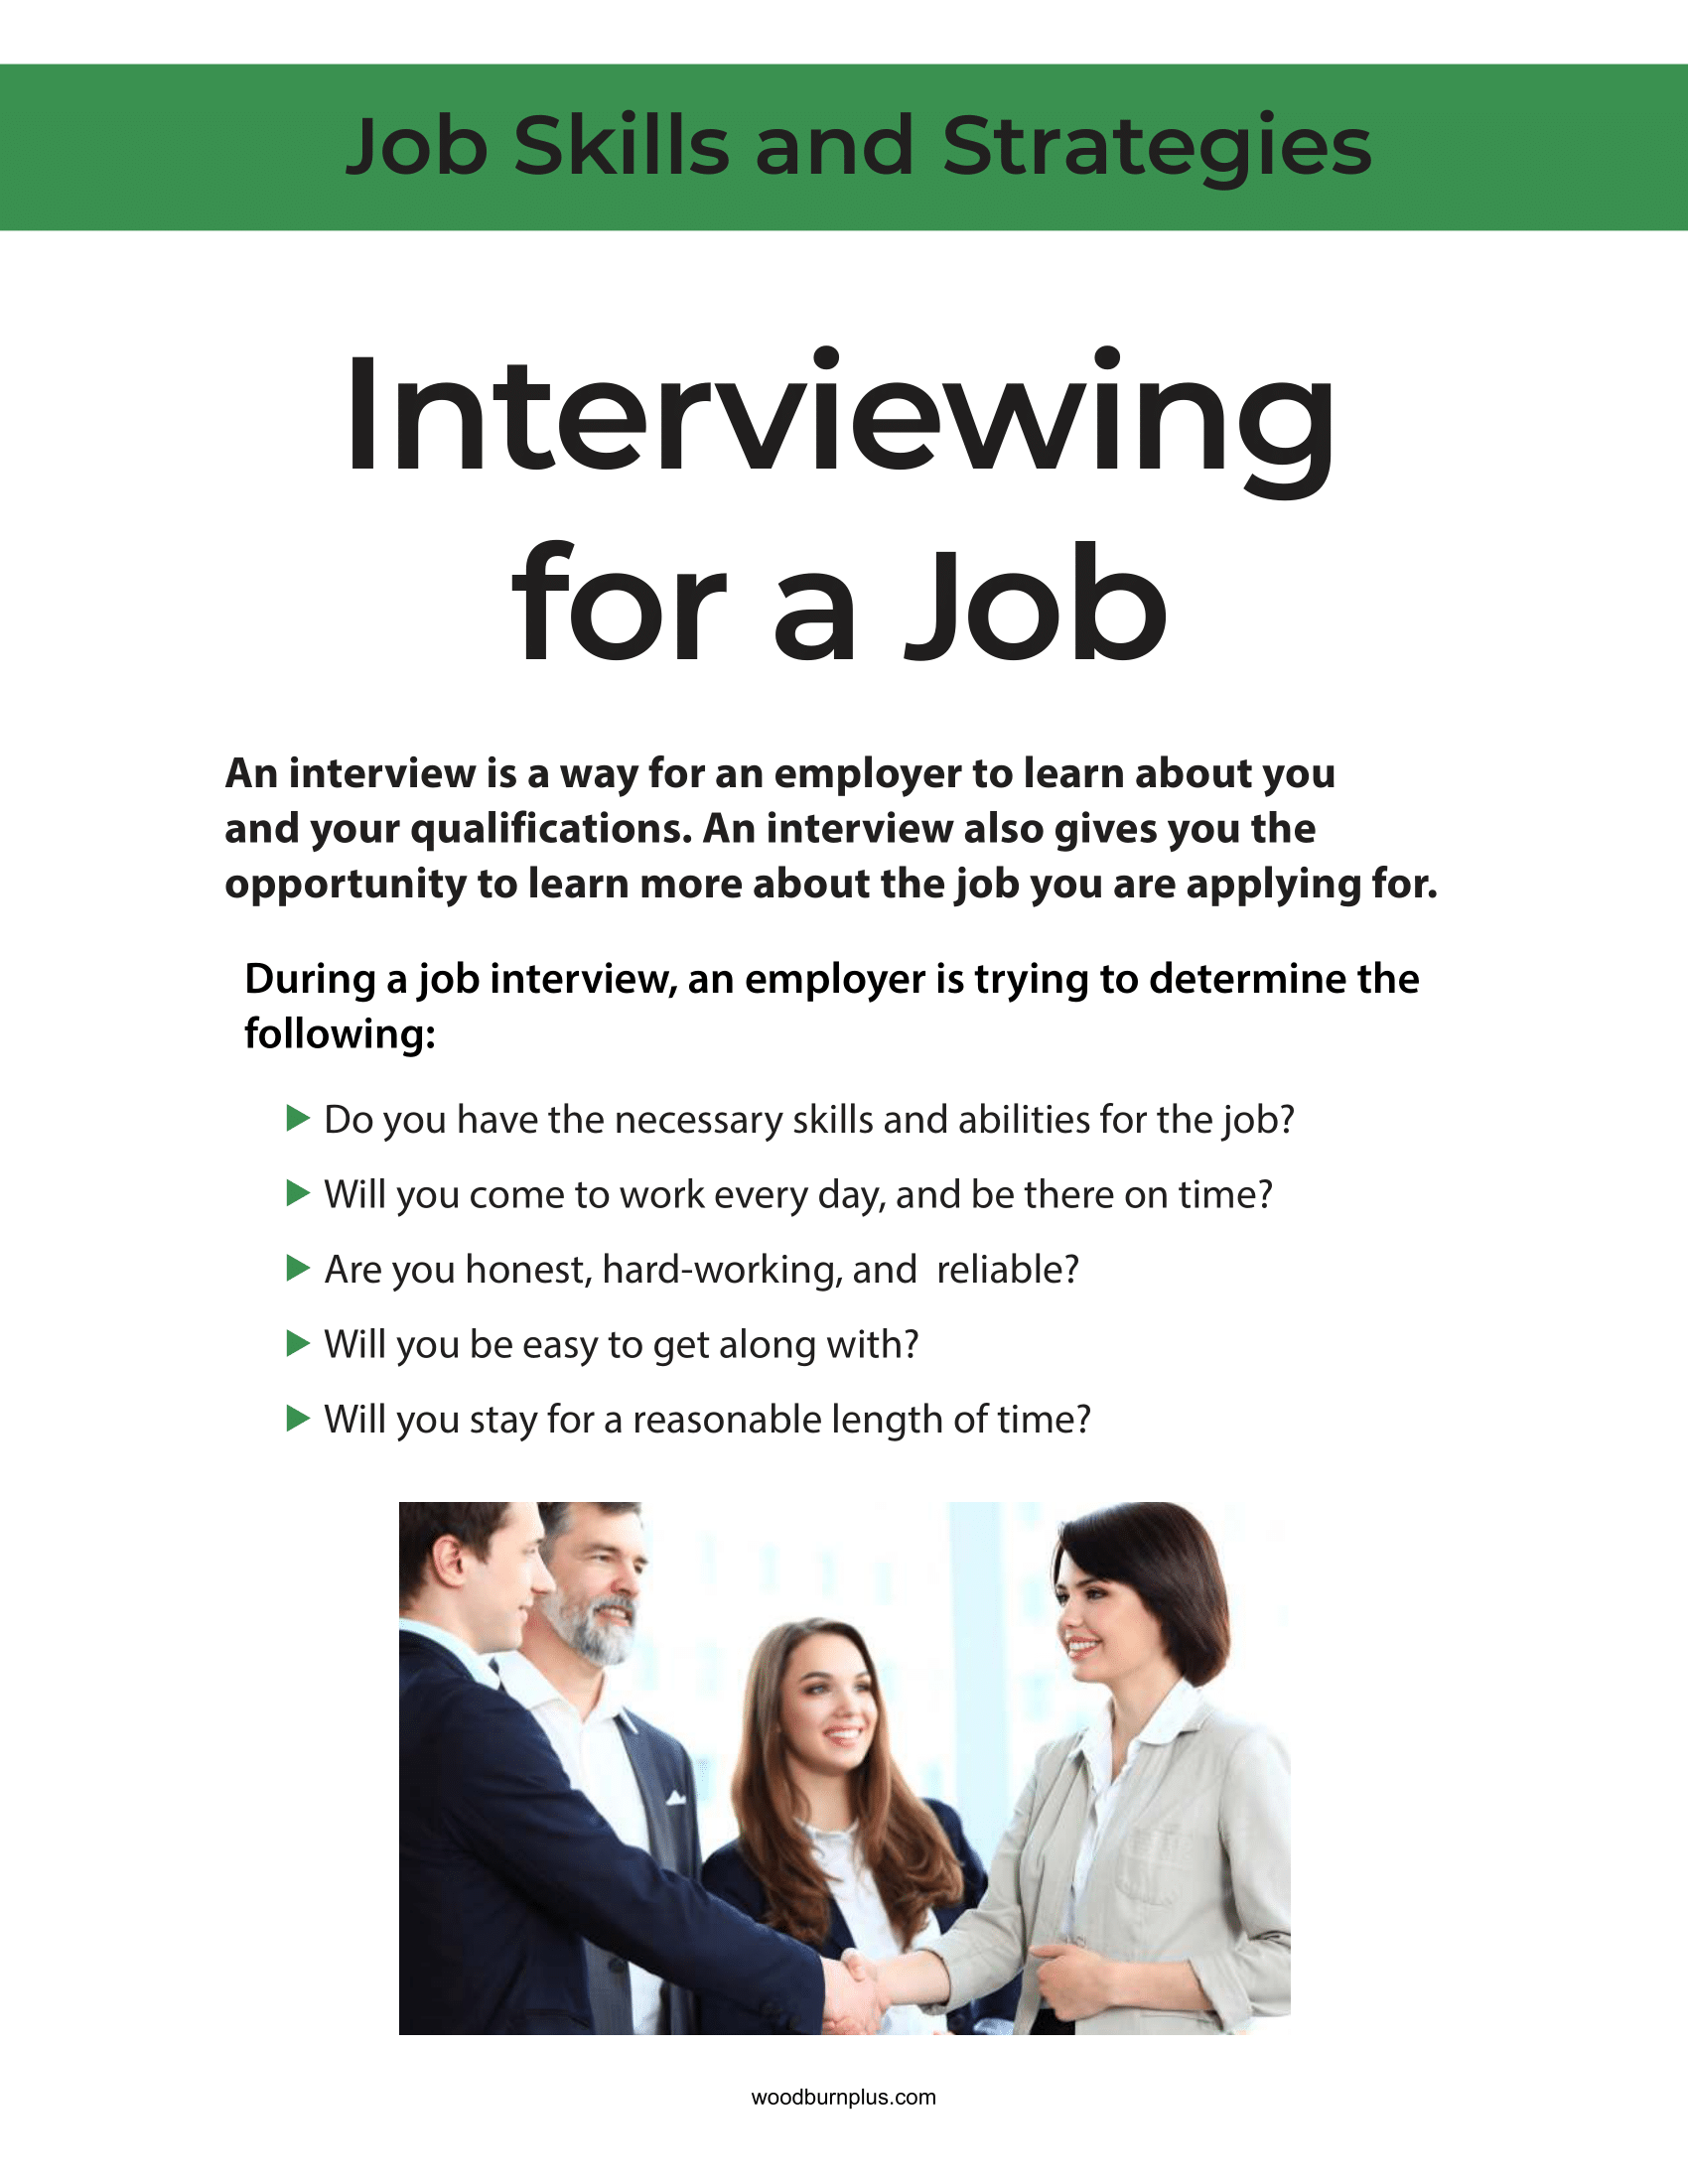 Interviewing for a Job